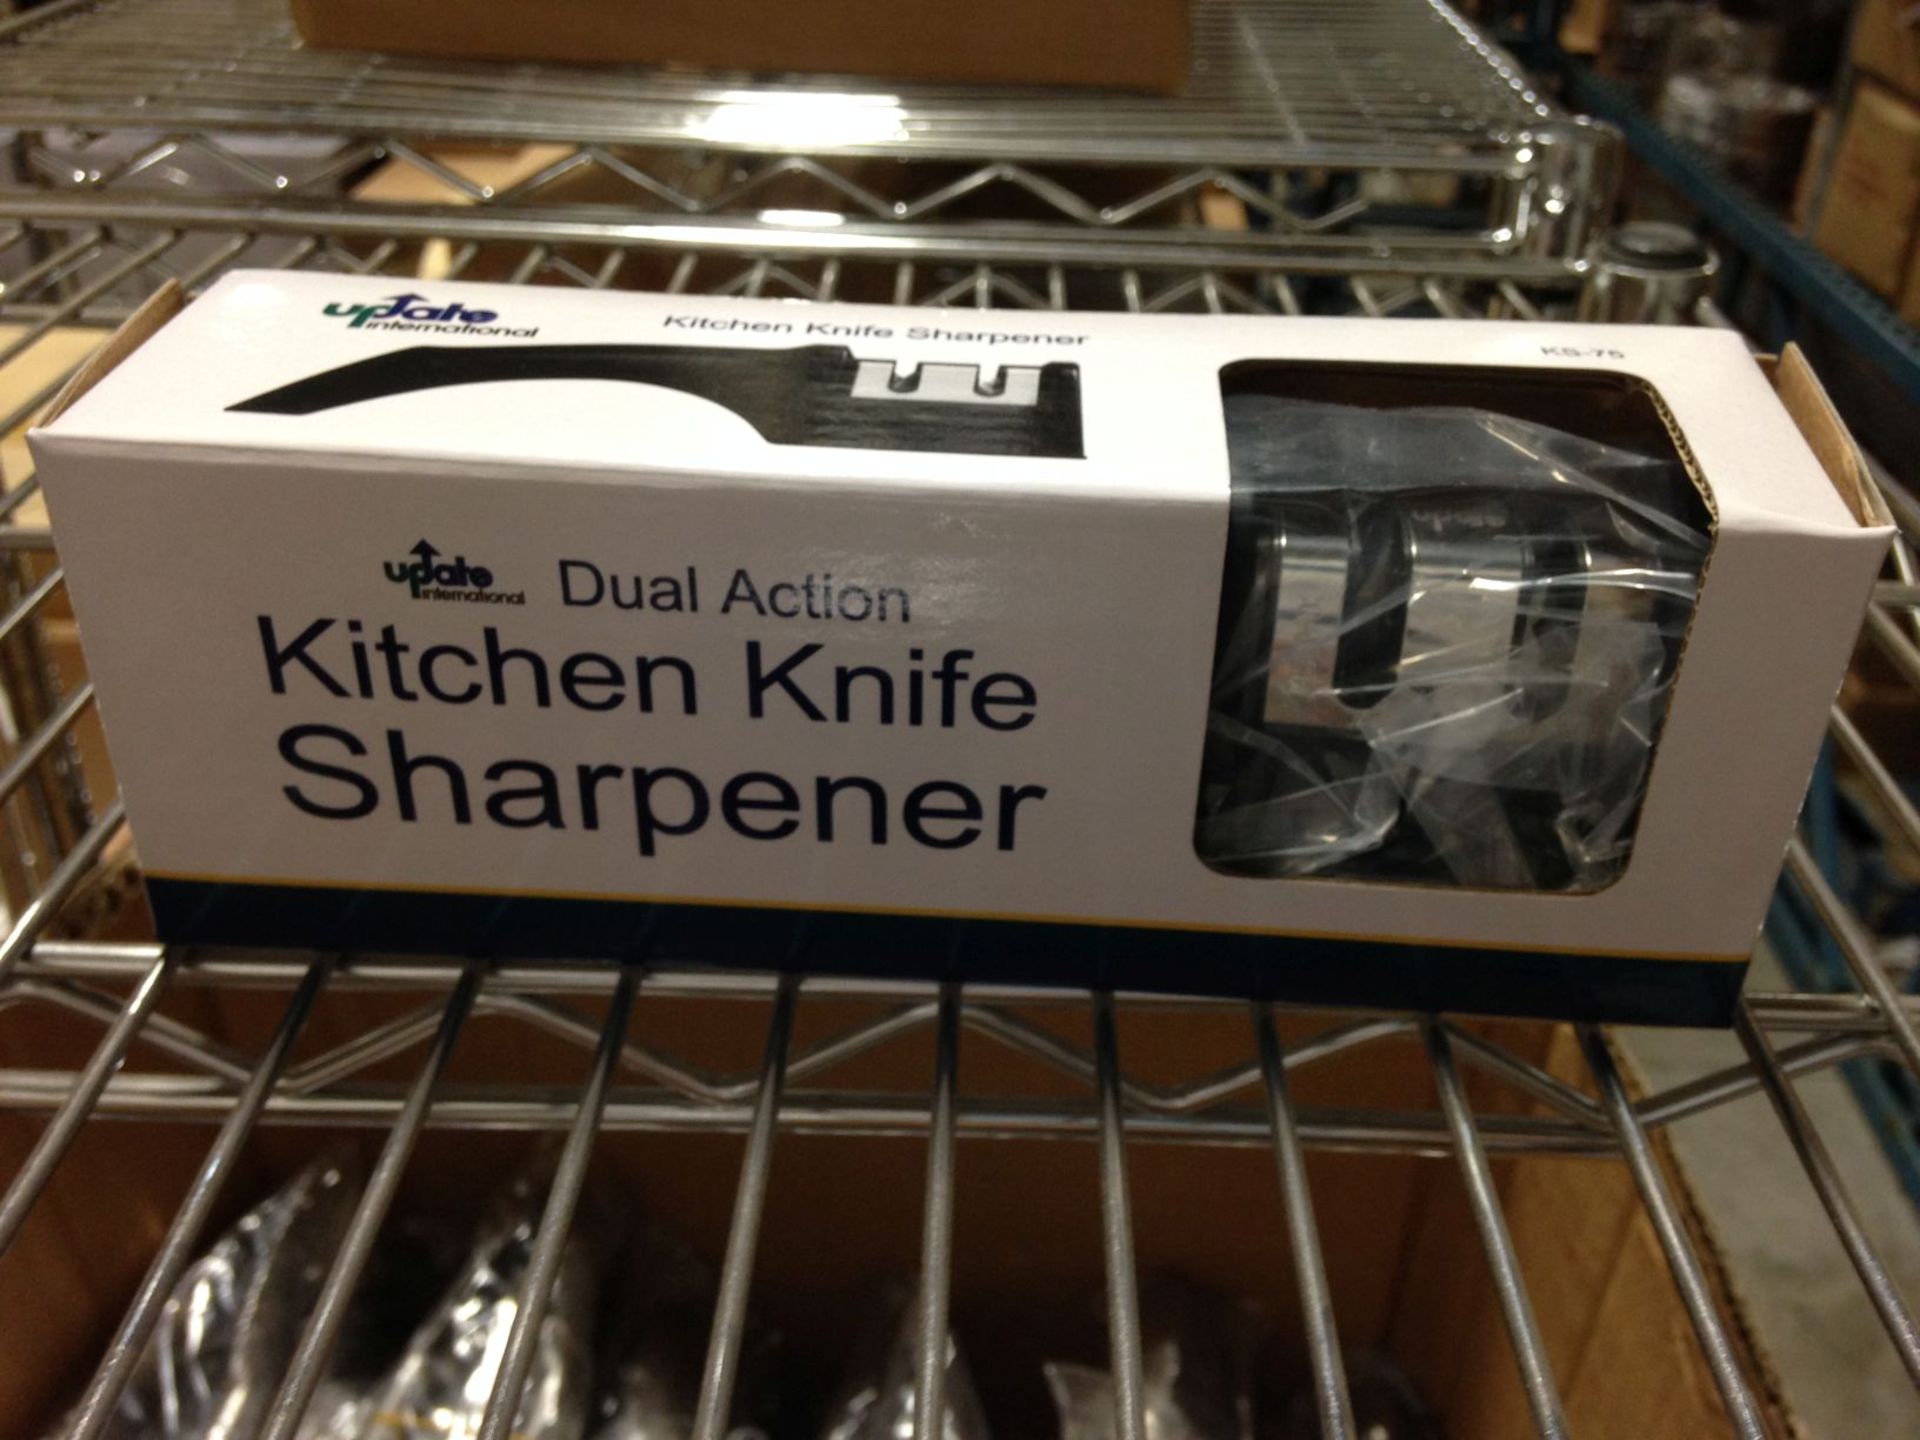 Dual Action Knife Sharpeners - Lot of 2